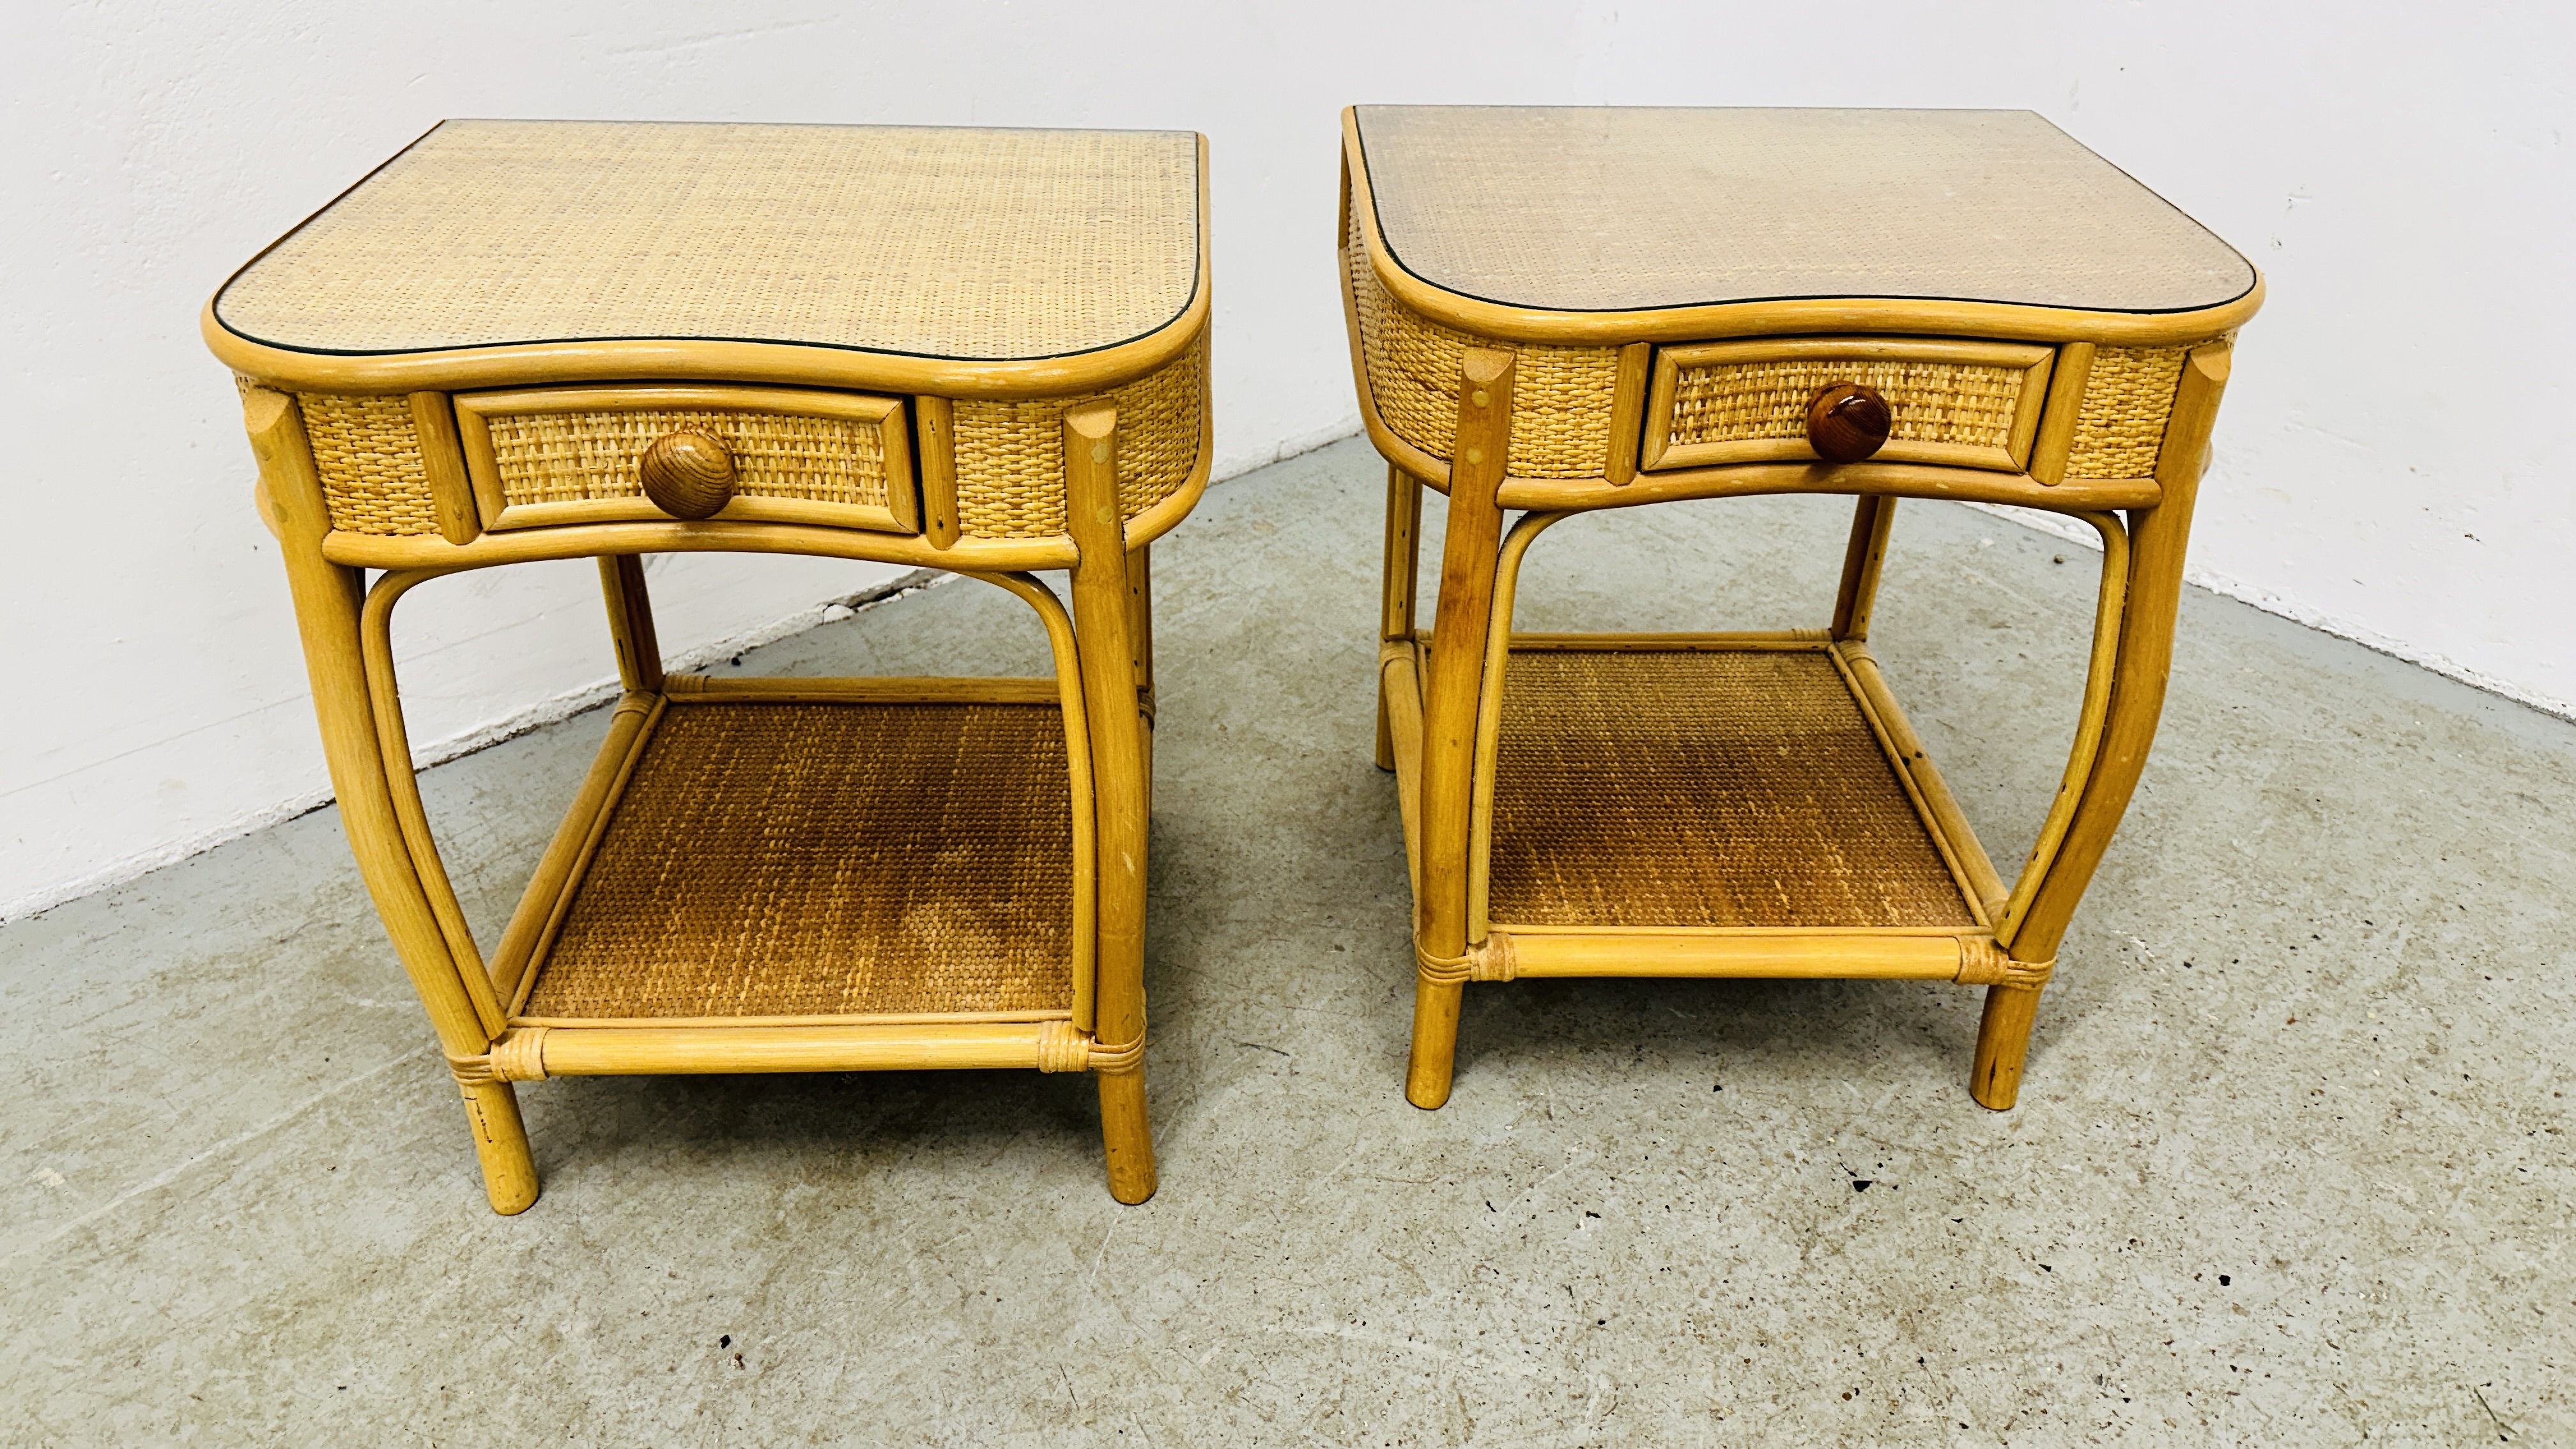 A PAIR OF WICKER SINGLE DRAWER BEDSIDE CABINETS WITH GLASS TOPS.